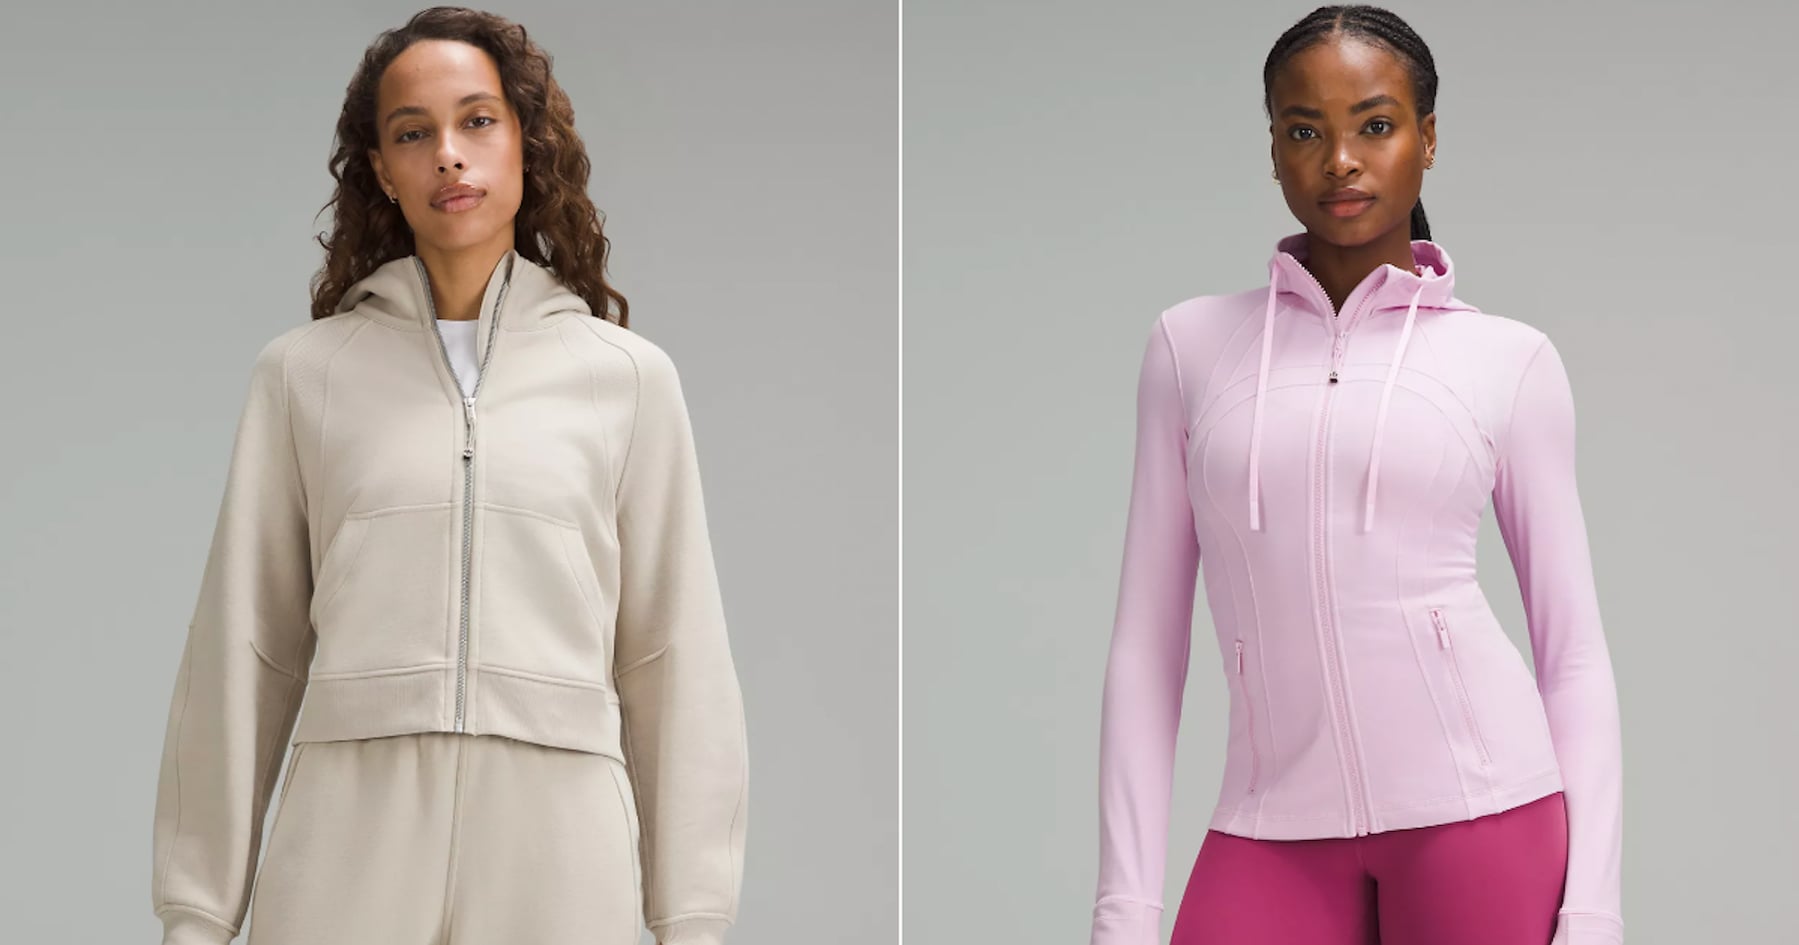 The NEW Define Jacket FIT REVIEW and Fabric Content - lululemon expert